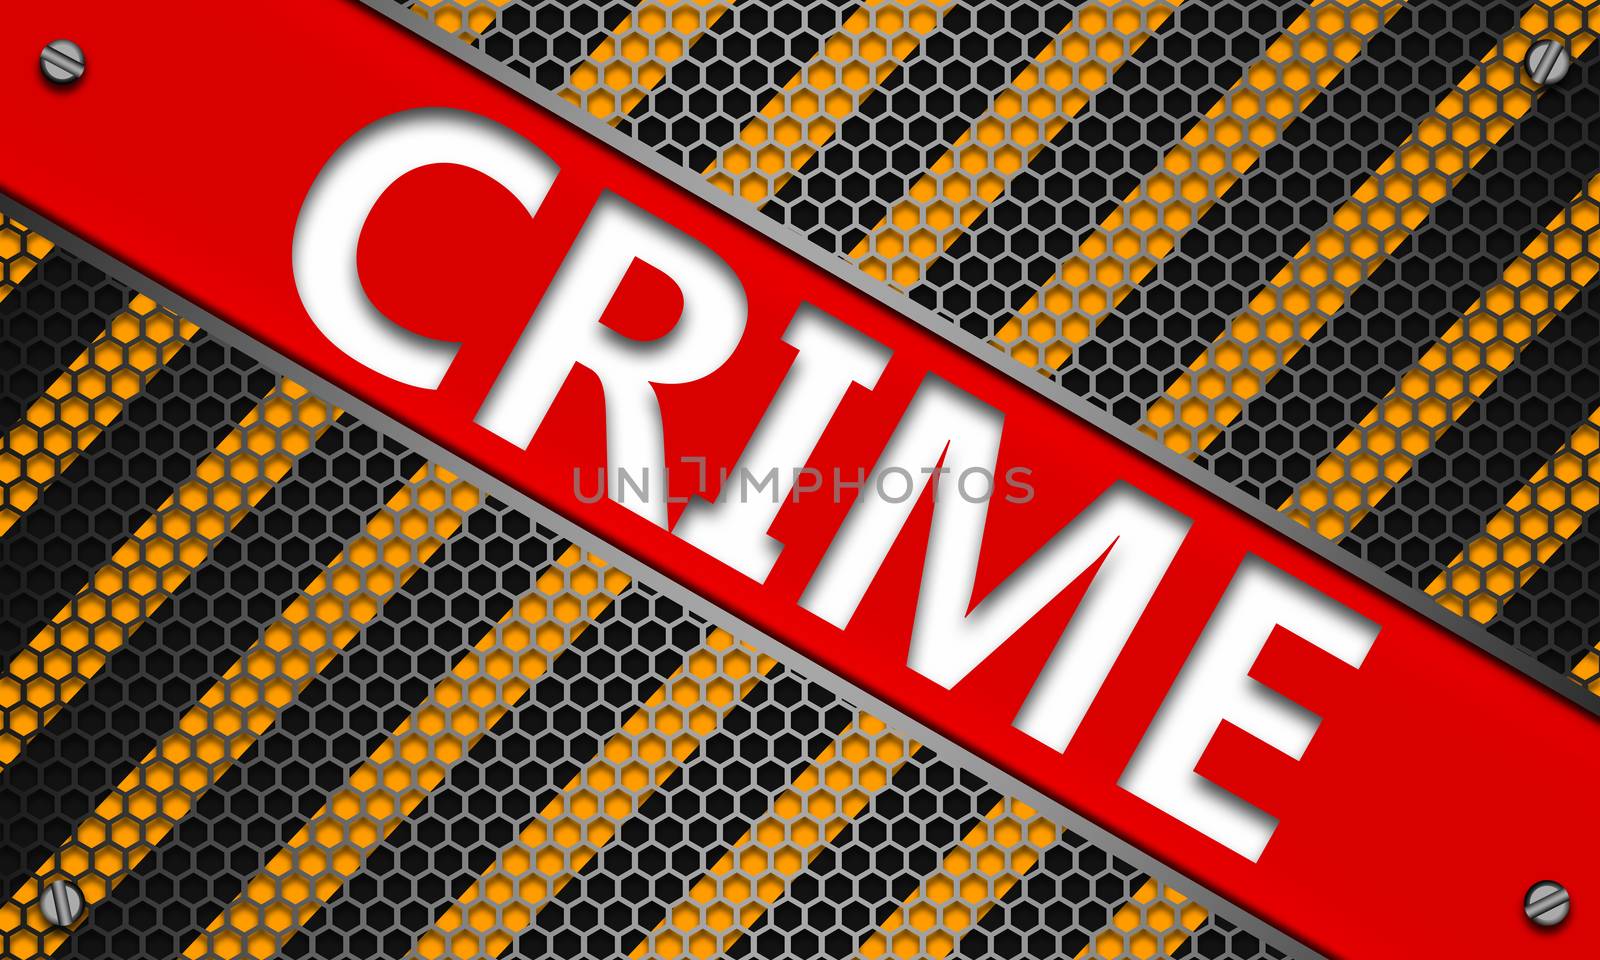 Crime concept on mesh hexagon background by tang90246